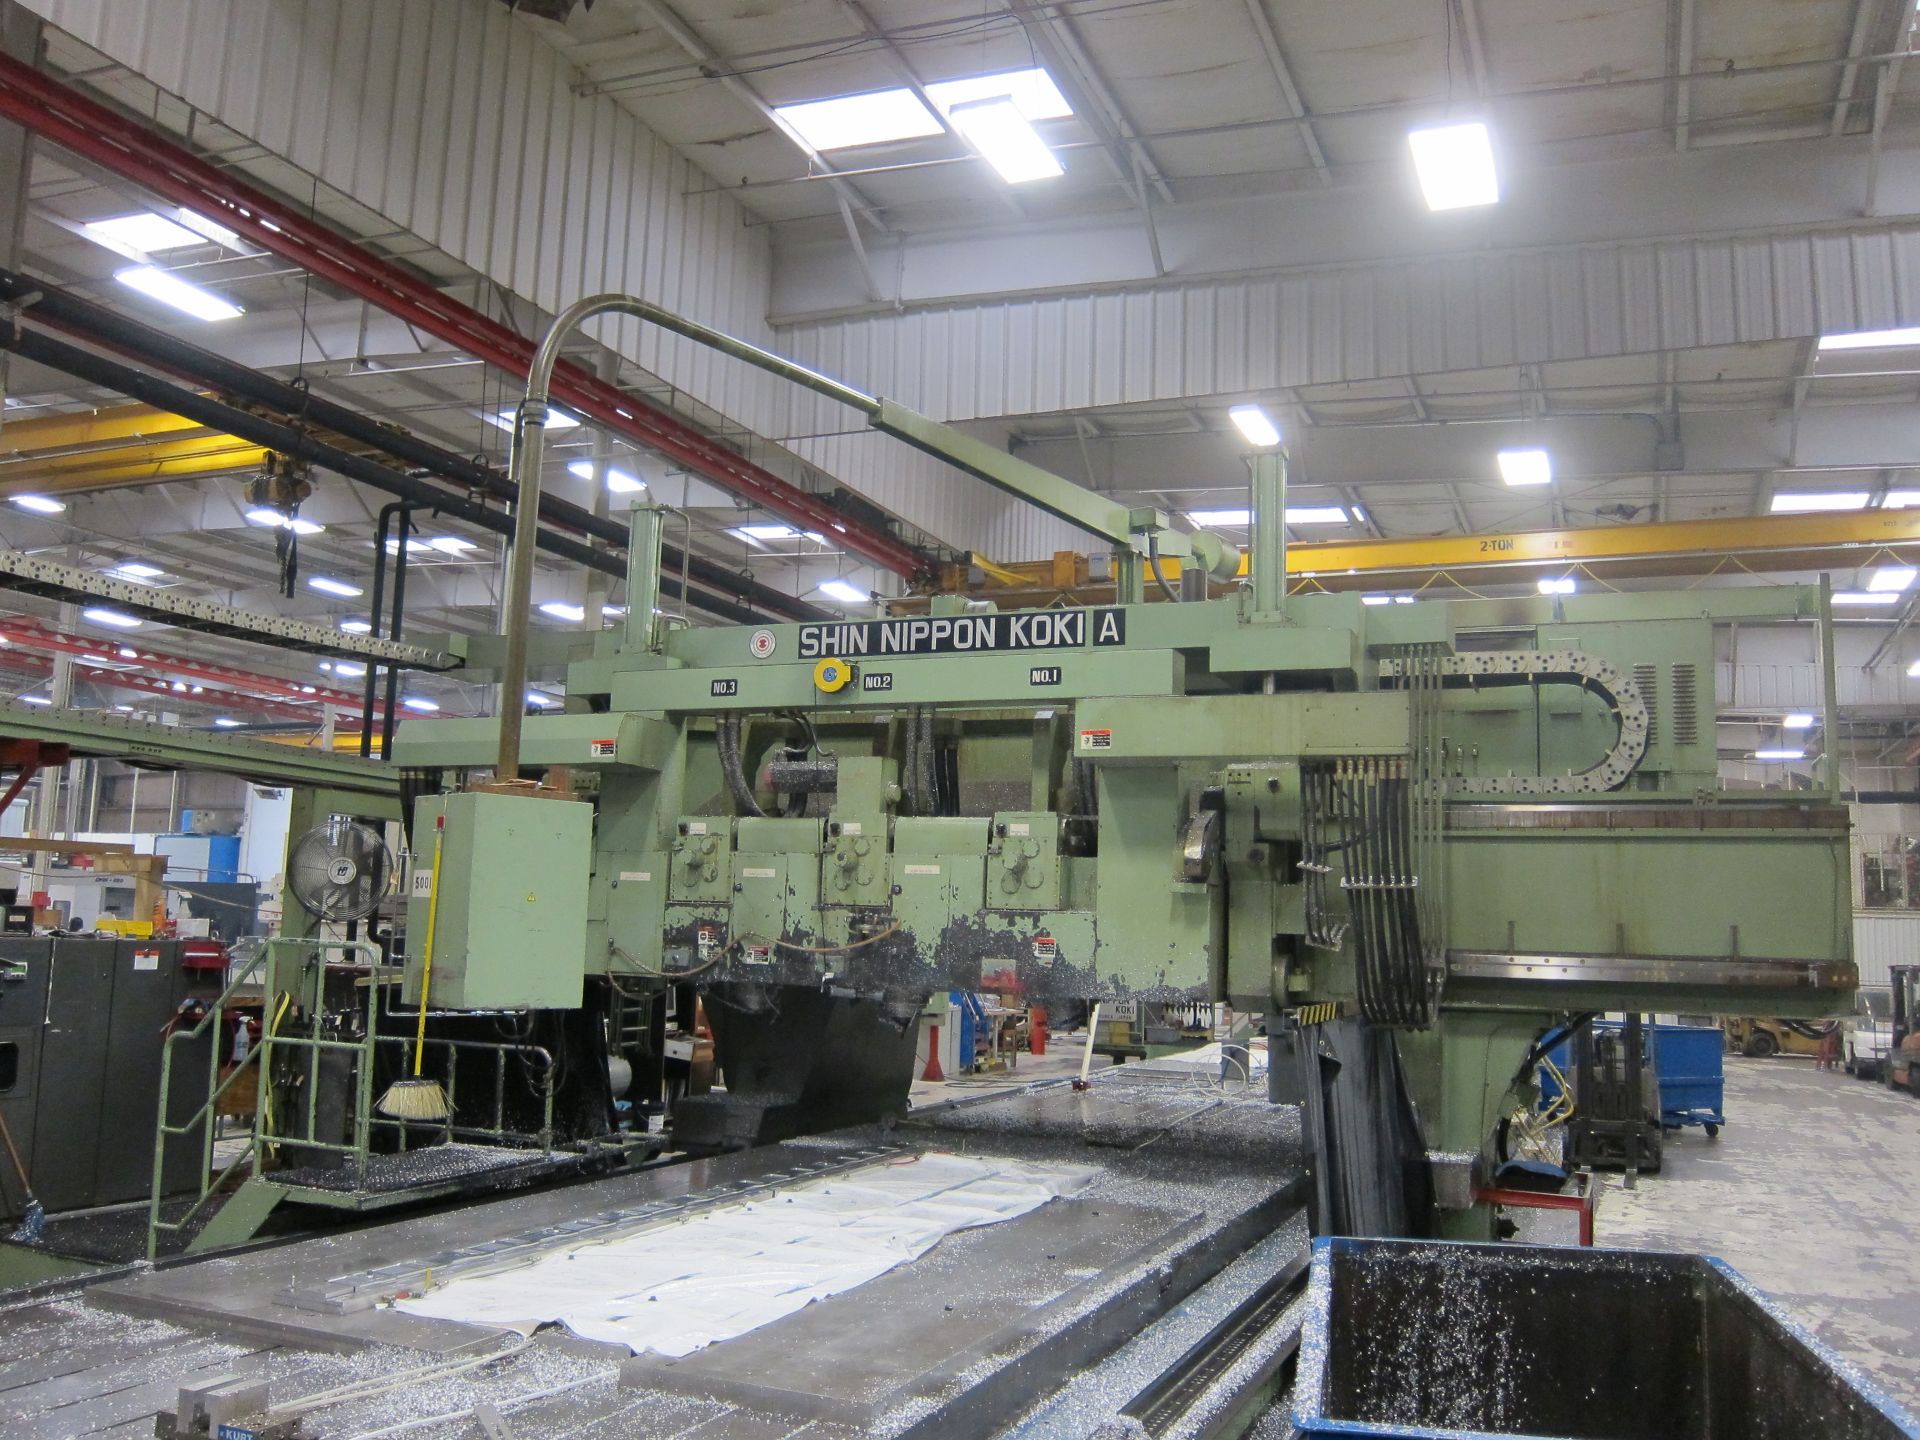 SNK PM-6 5-Axis CNC Gantry Type Profile Milling Machine - 1st Gantry Only - Image 2 of 7